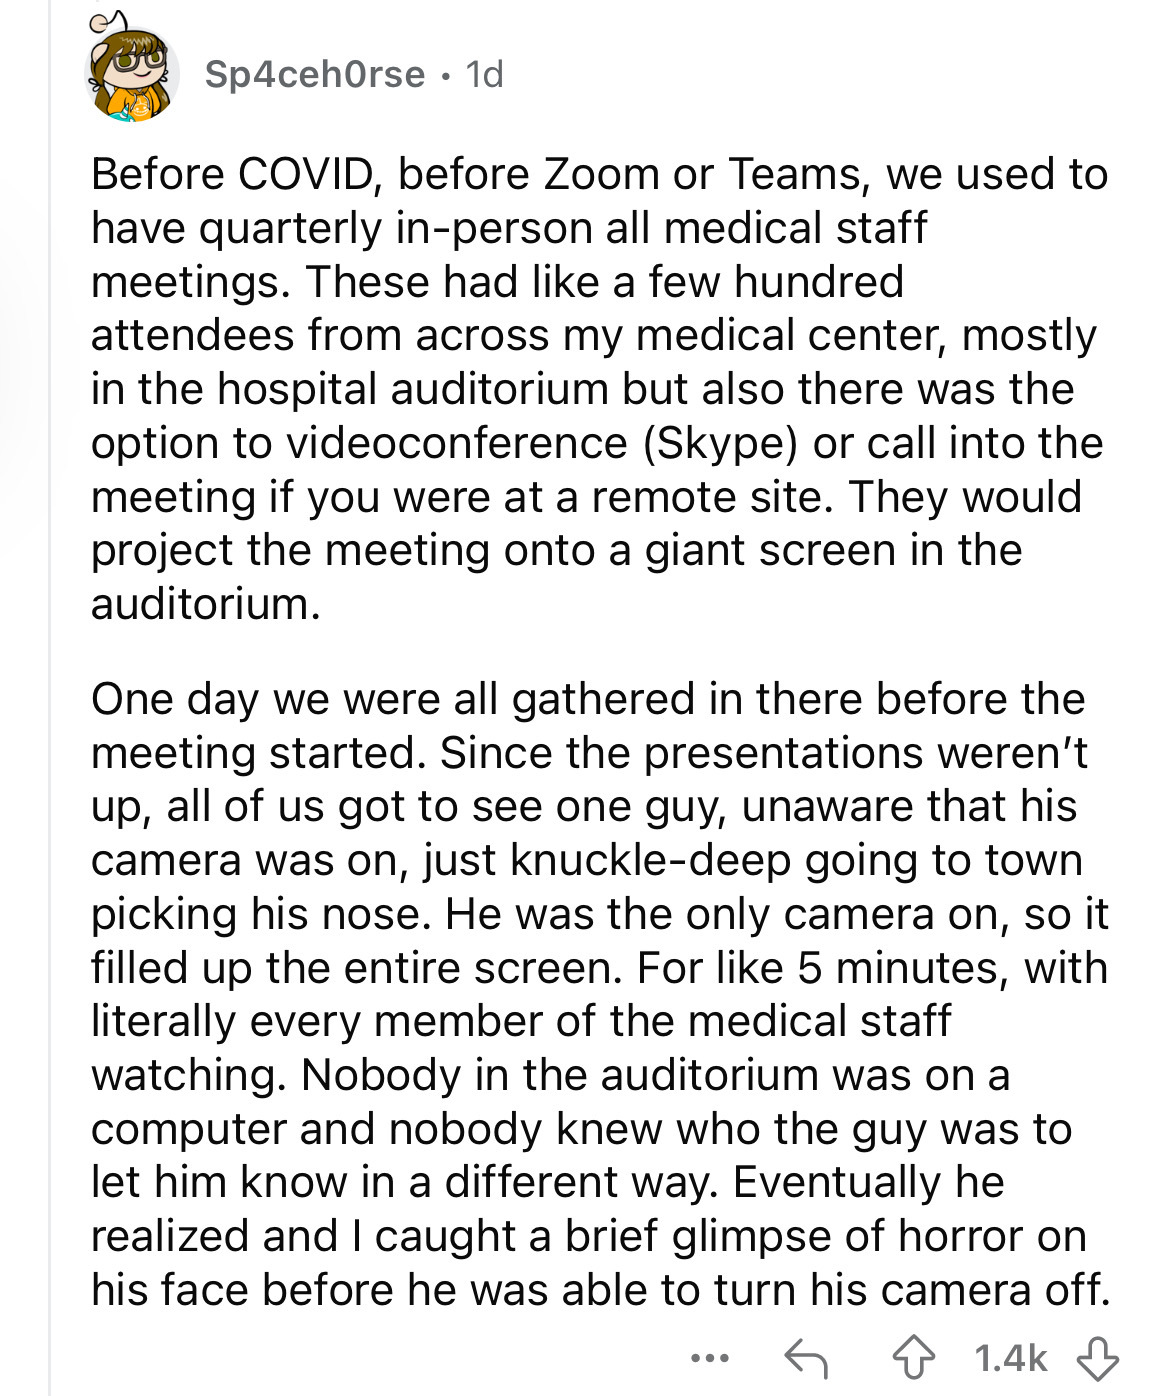 document - Sp4cehorse 1d Before Covid, before Zoom or Teams, we used to have quarterly inperson all medical staff meetings. These had a few hundred. attendees from across my medical center, mostly in the hospital auditorium but also there was the option t